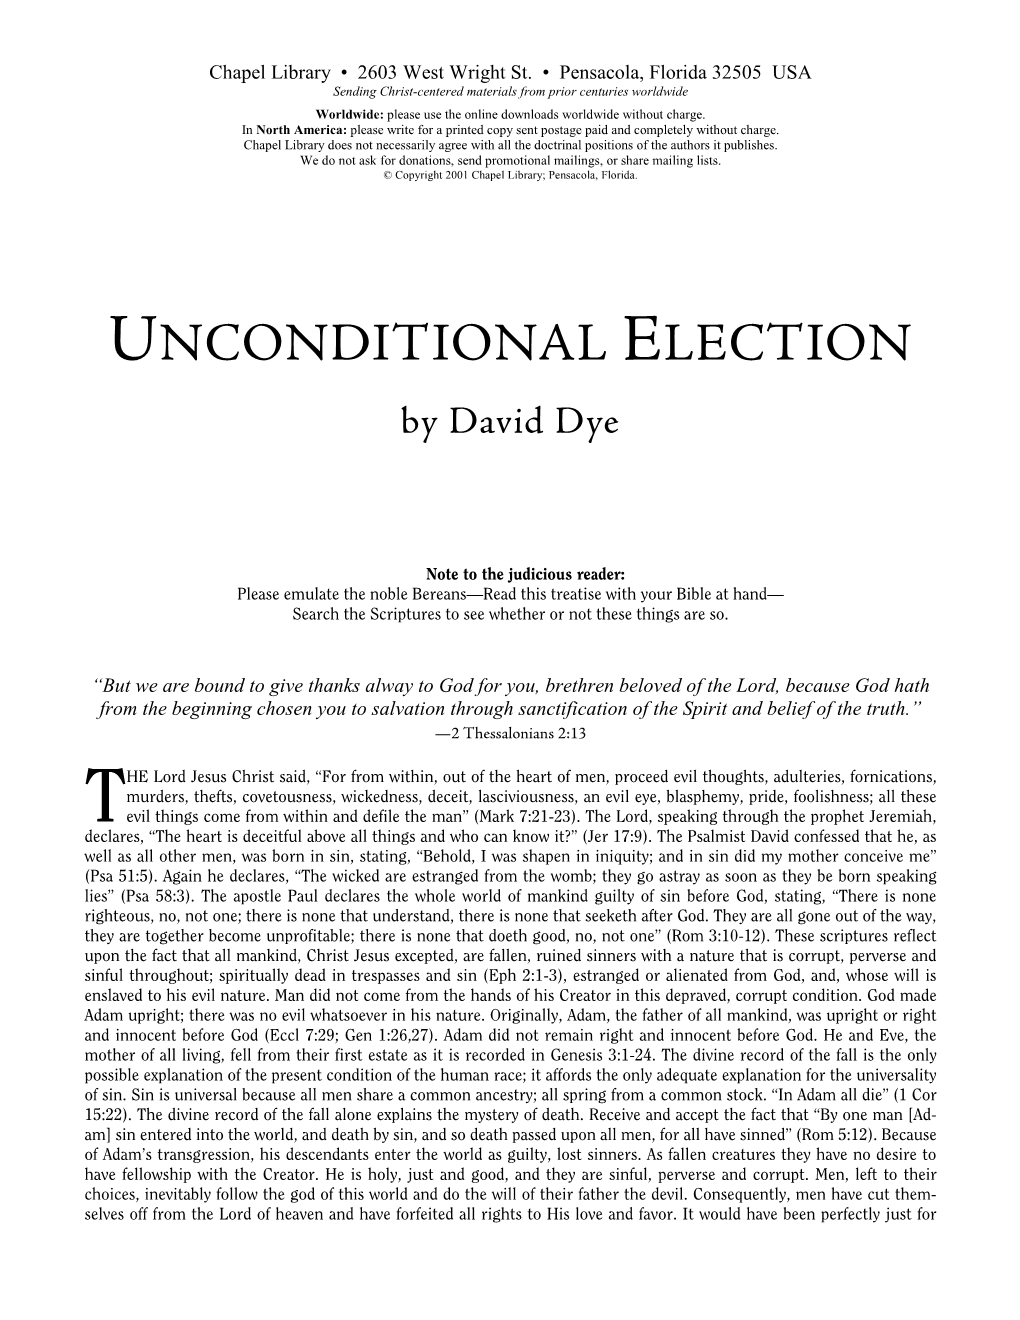 UNCONDITIONAL ELECTION by David Dye